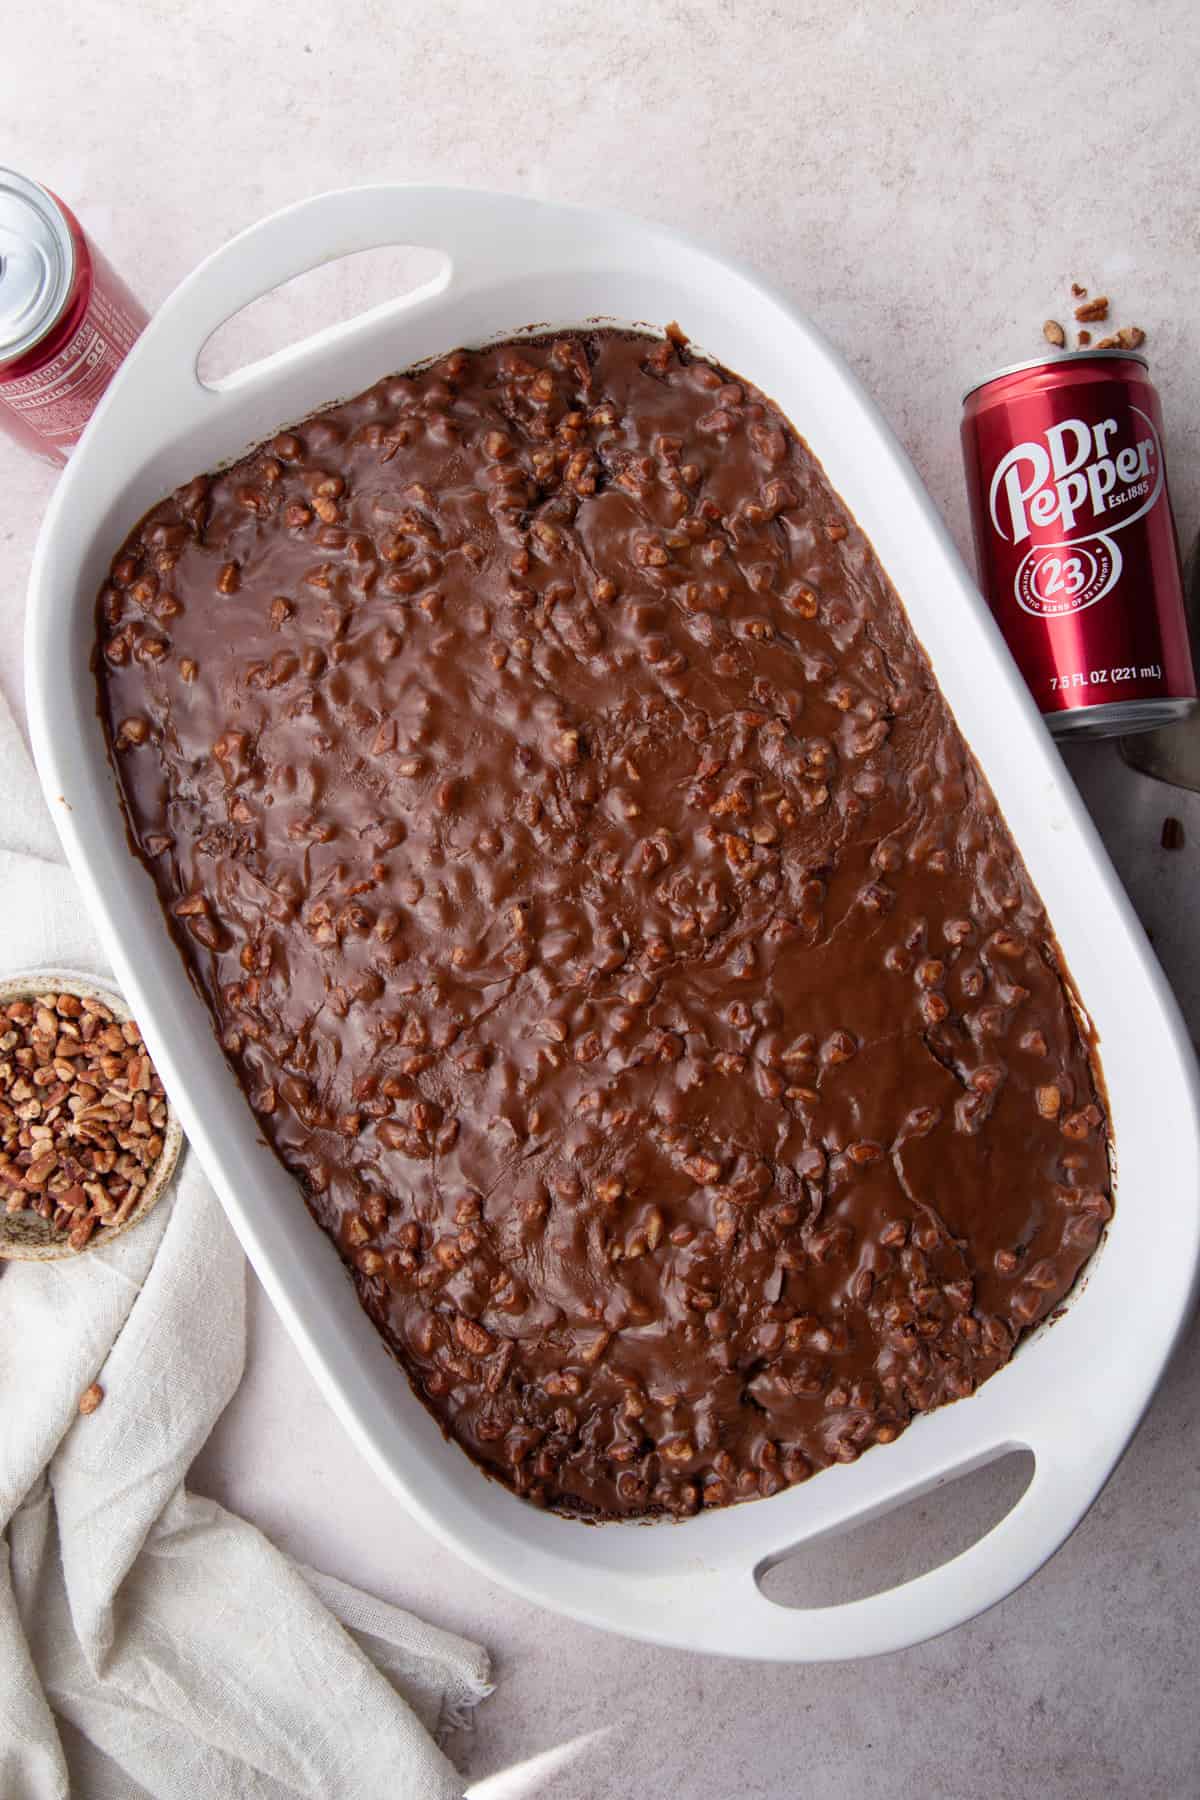 whole dr. pepper cake topped with pecan chocolate frosting.